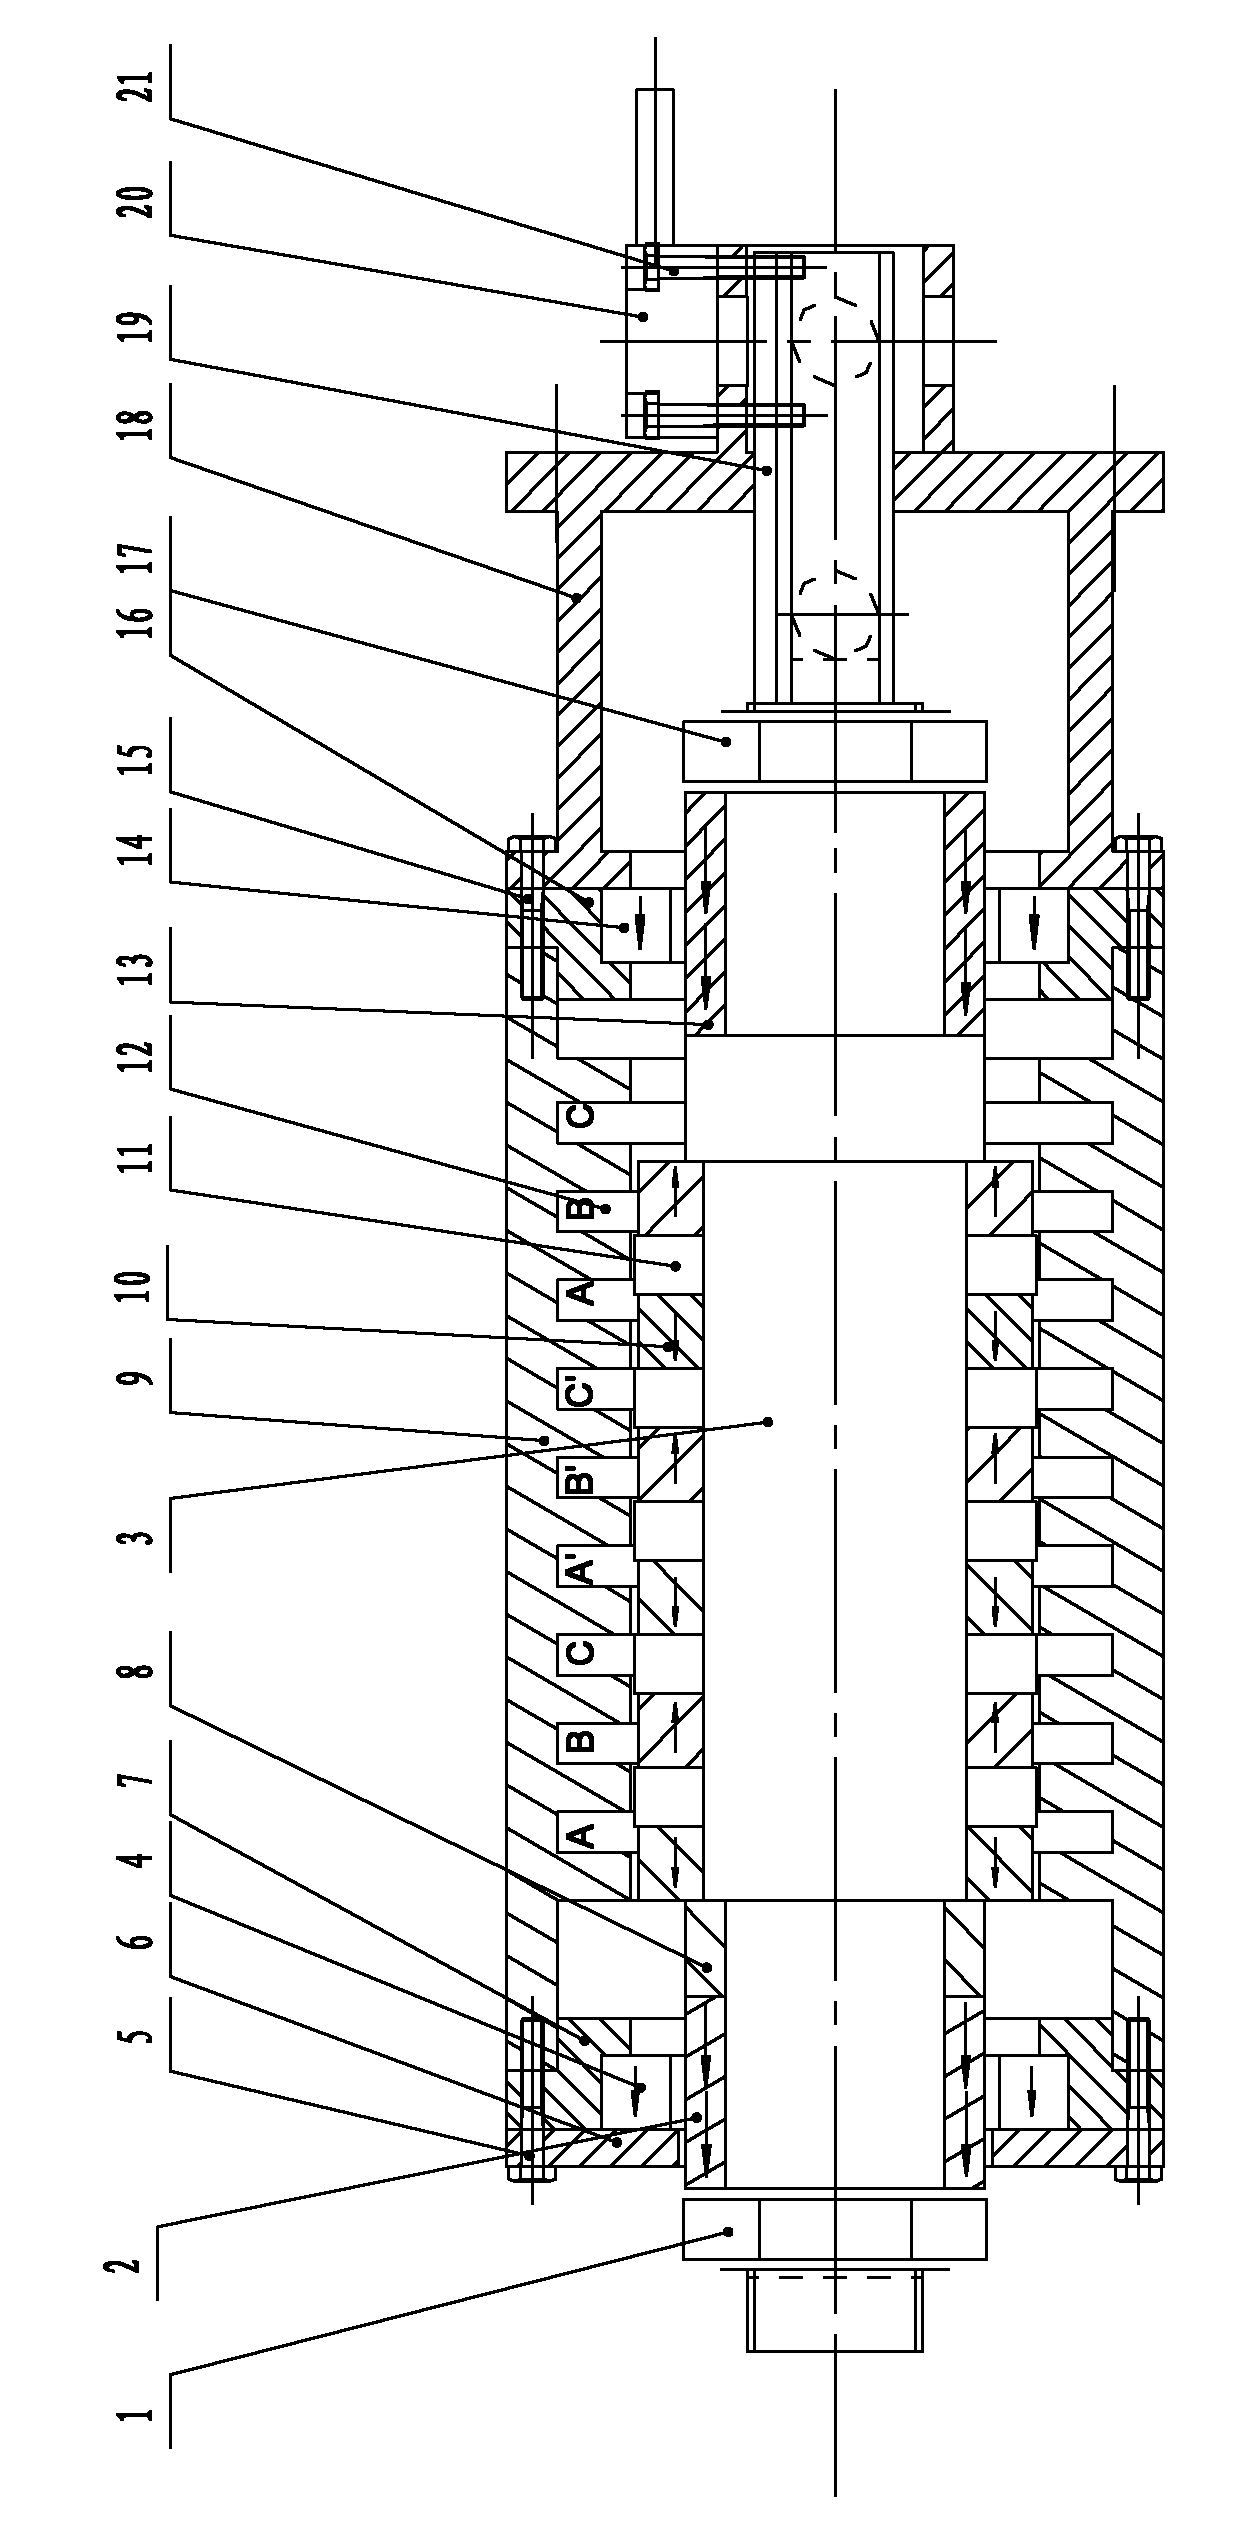 Permanent-magnetic suspension supporting cylindrical linear motor